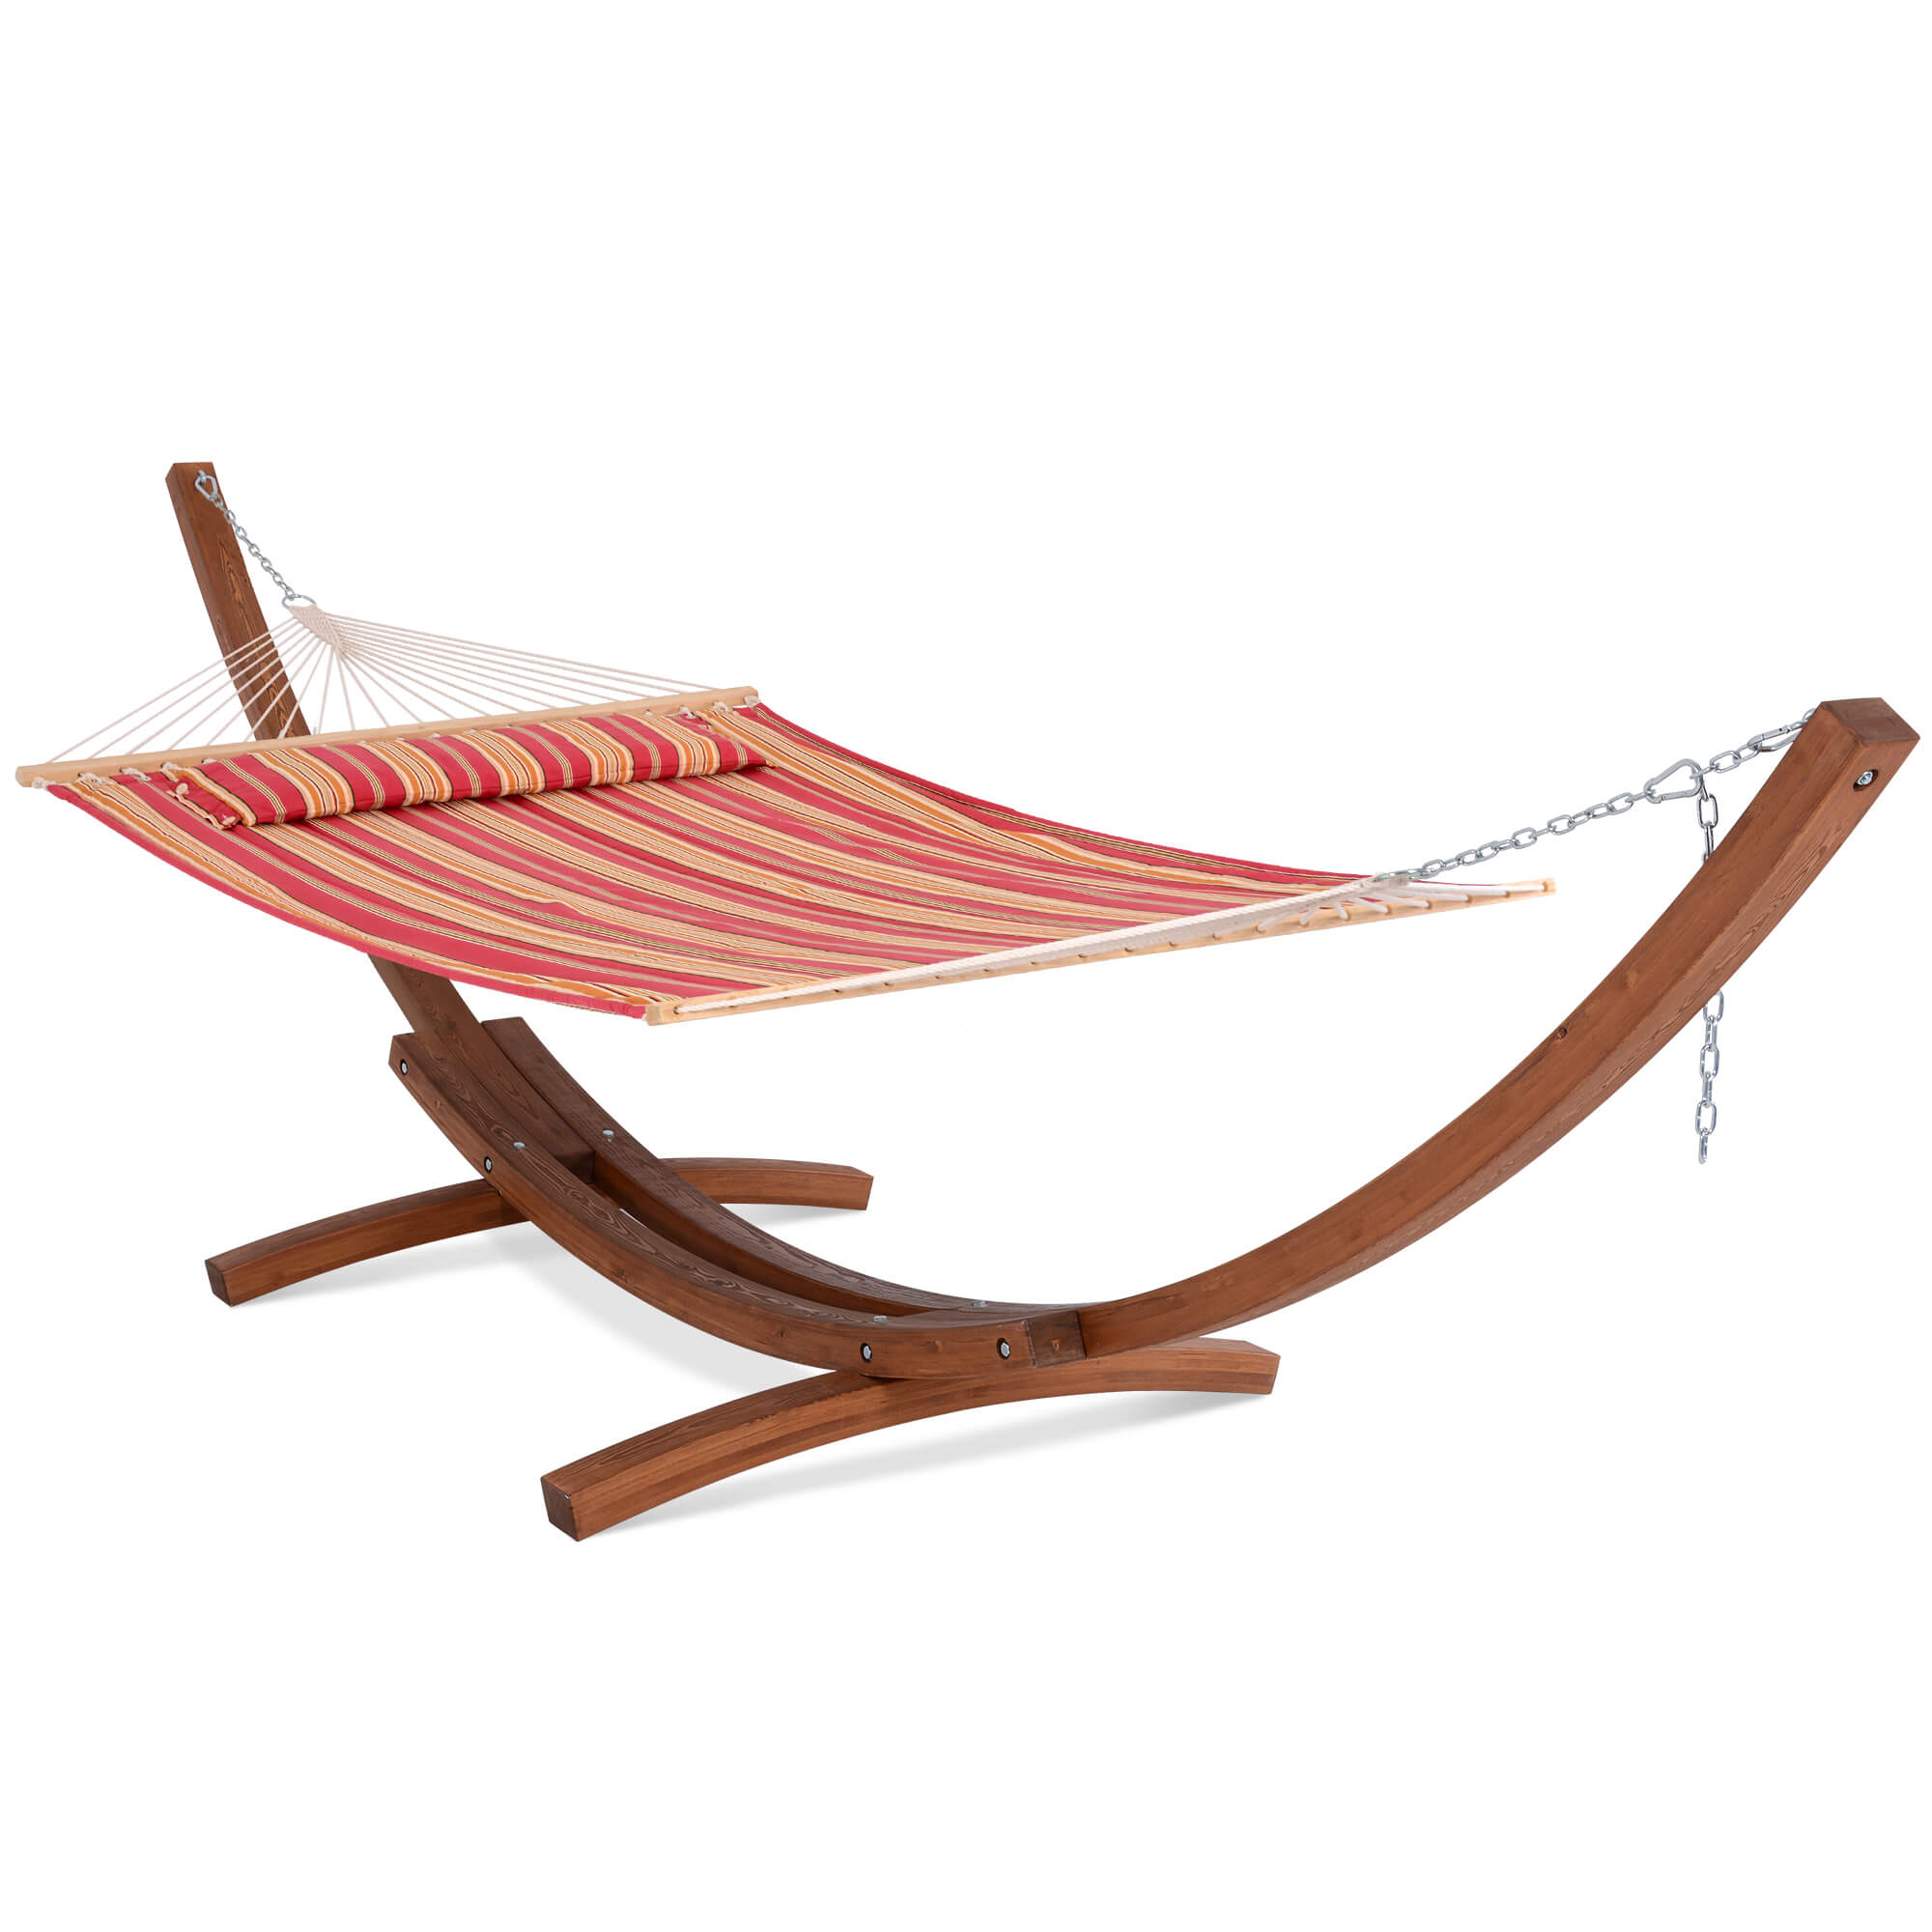 SUNCREAT-outdoor-double-quilted-hammock-with-stand#color_red-stripes